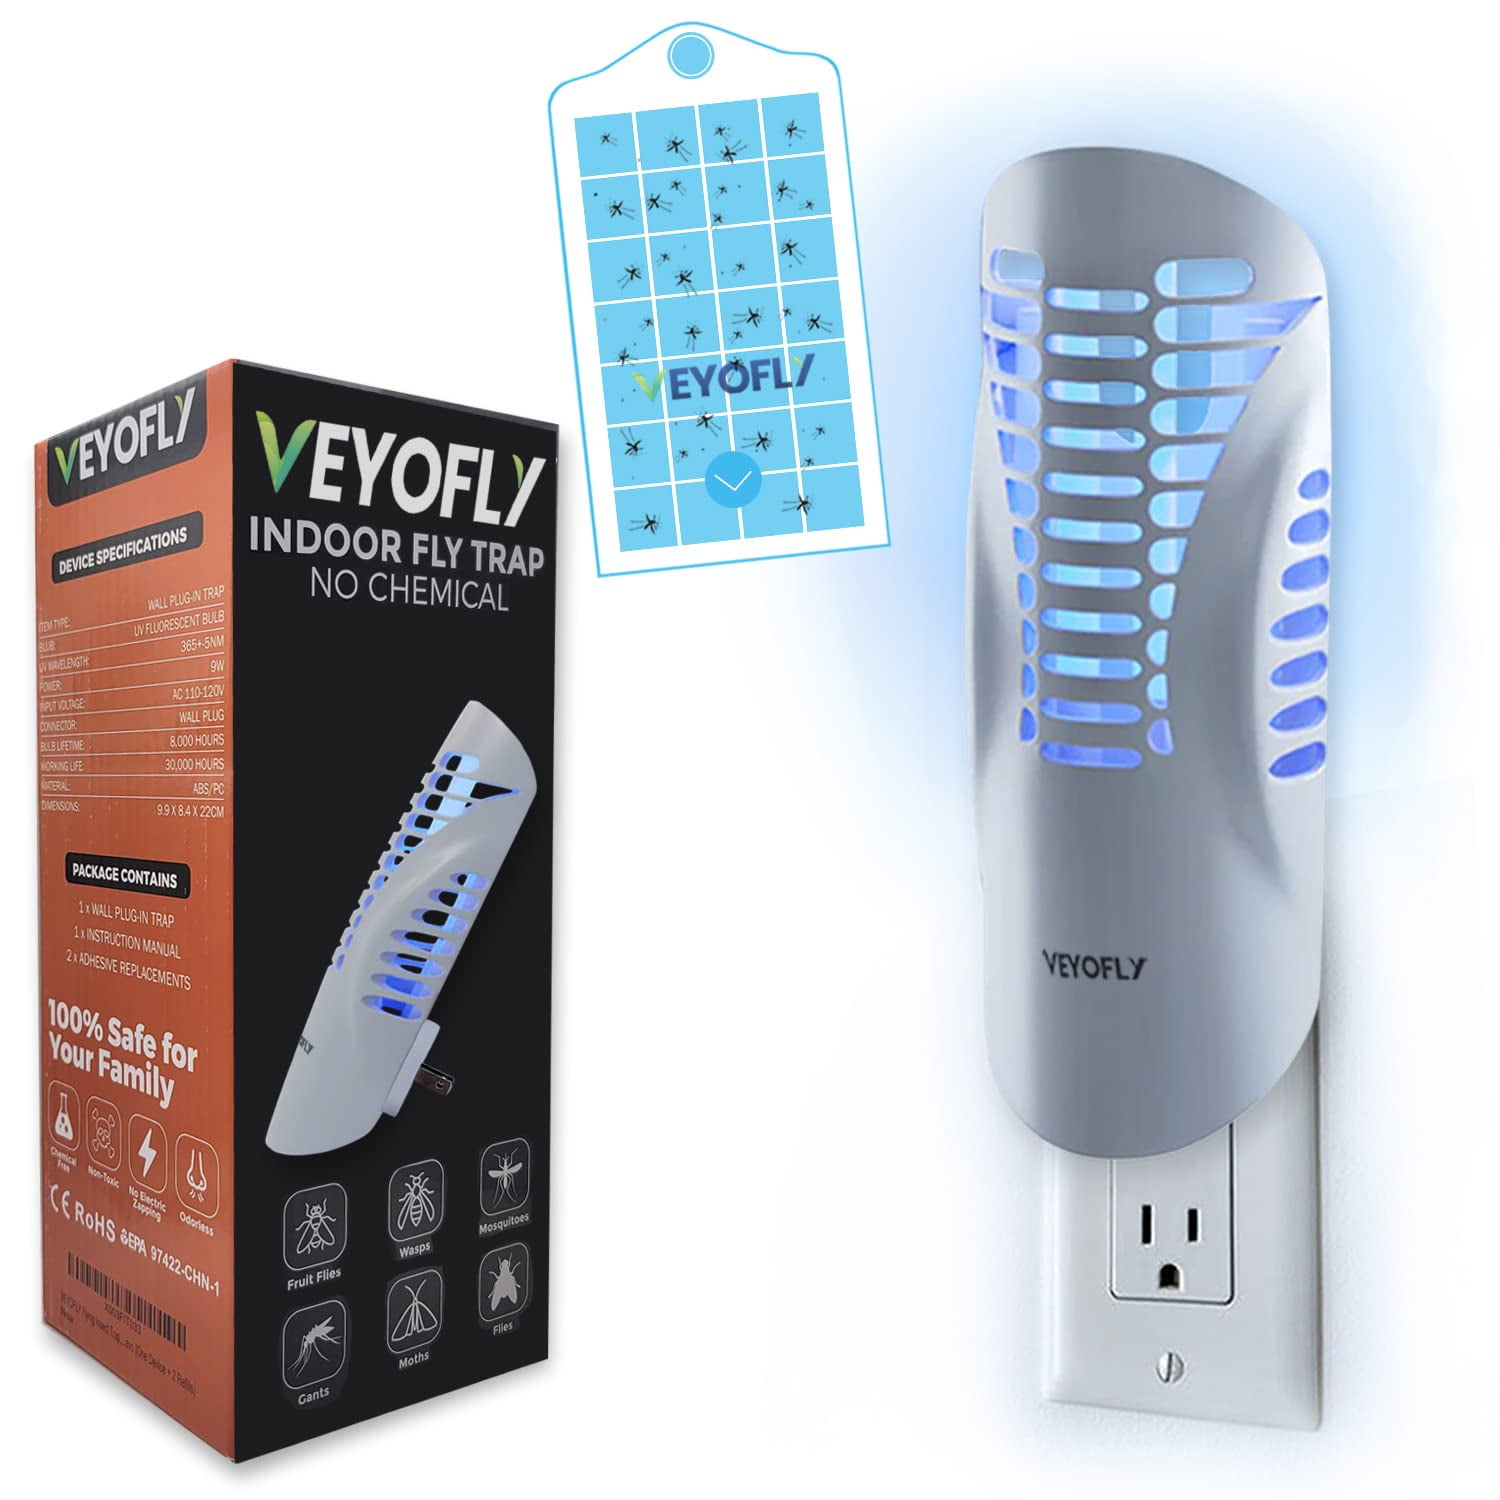 VEYOFLY Fly Trap, Plug in Flying Insect Trap, Fruit Fly Traps for Indoors-Safer  Home Indoor